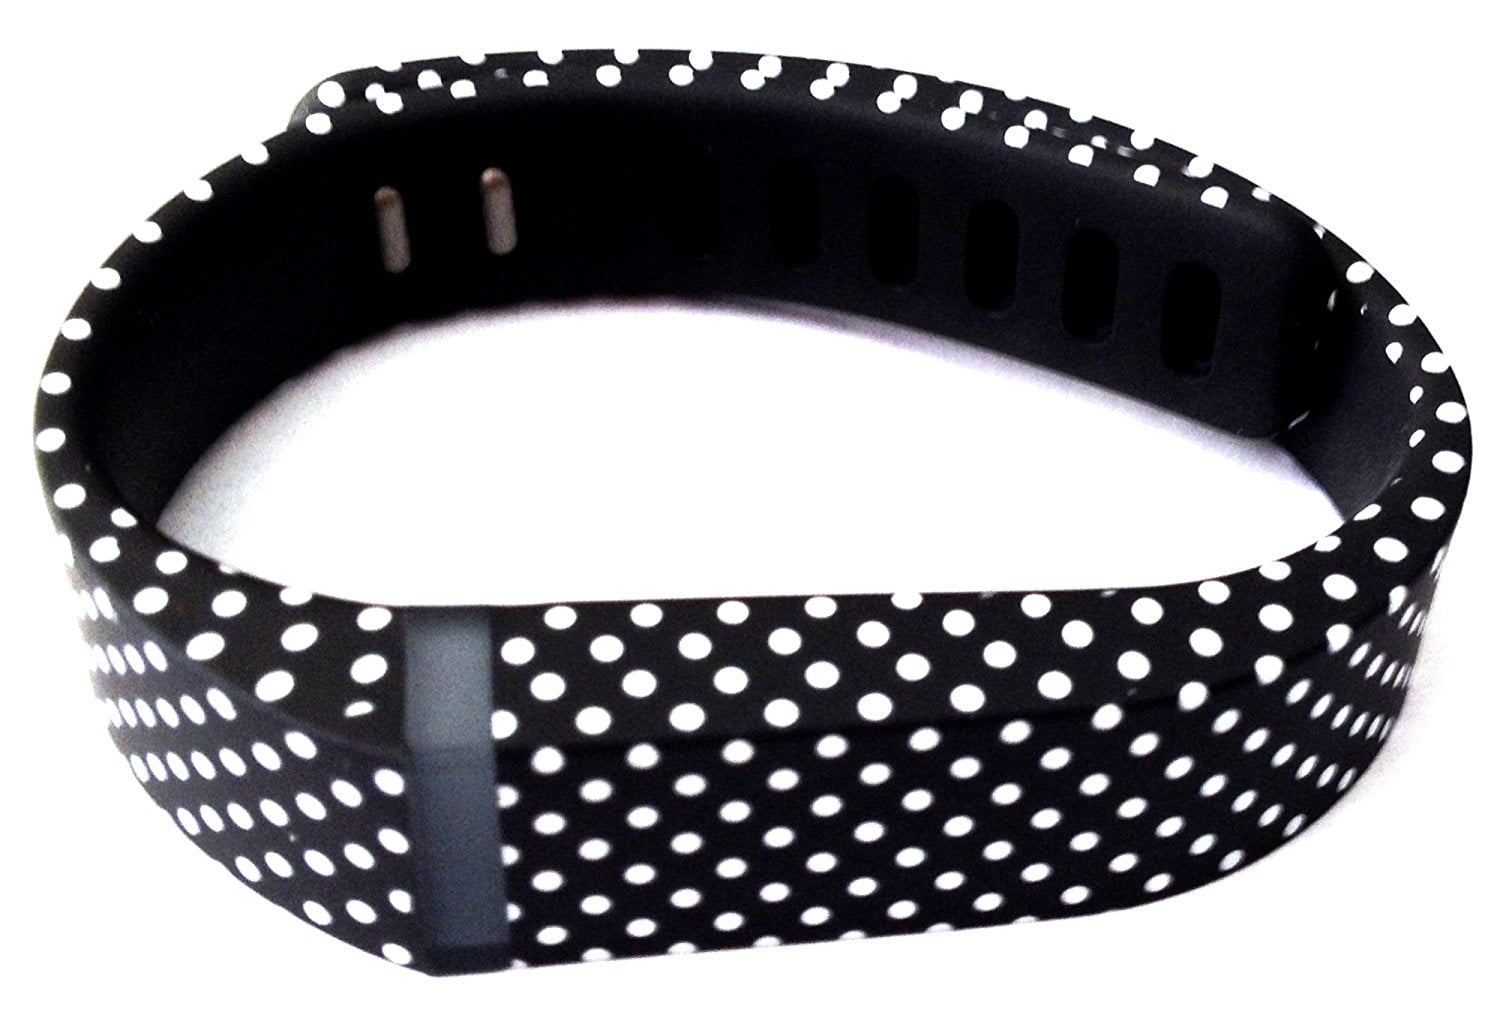 Blackweb Silicon Replacement Band For Fitbit Alta Polka Dot Black 